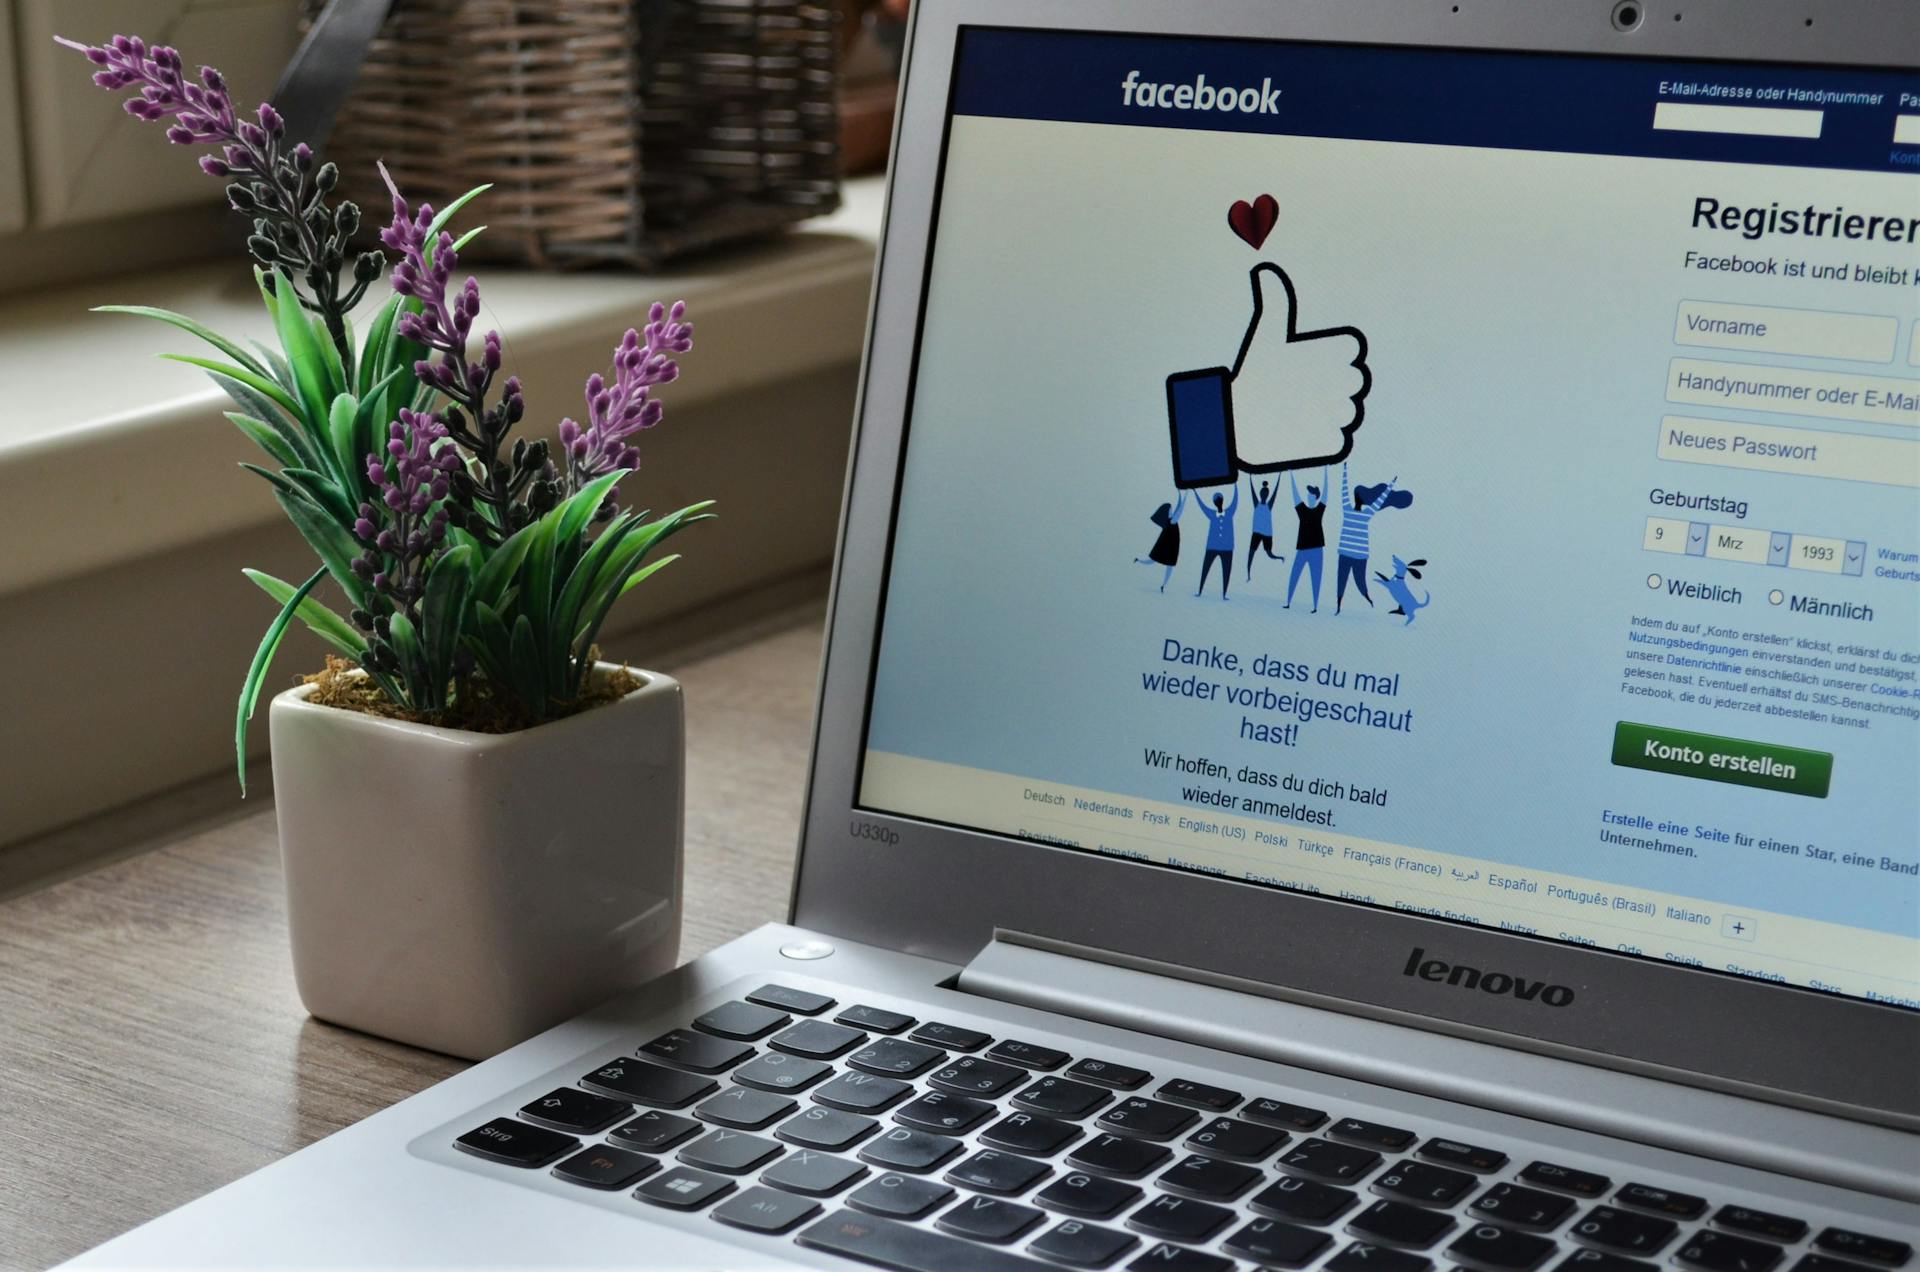 Laptop opened to Facebook | Source: Pexels